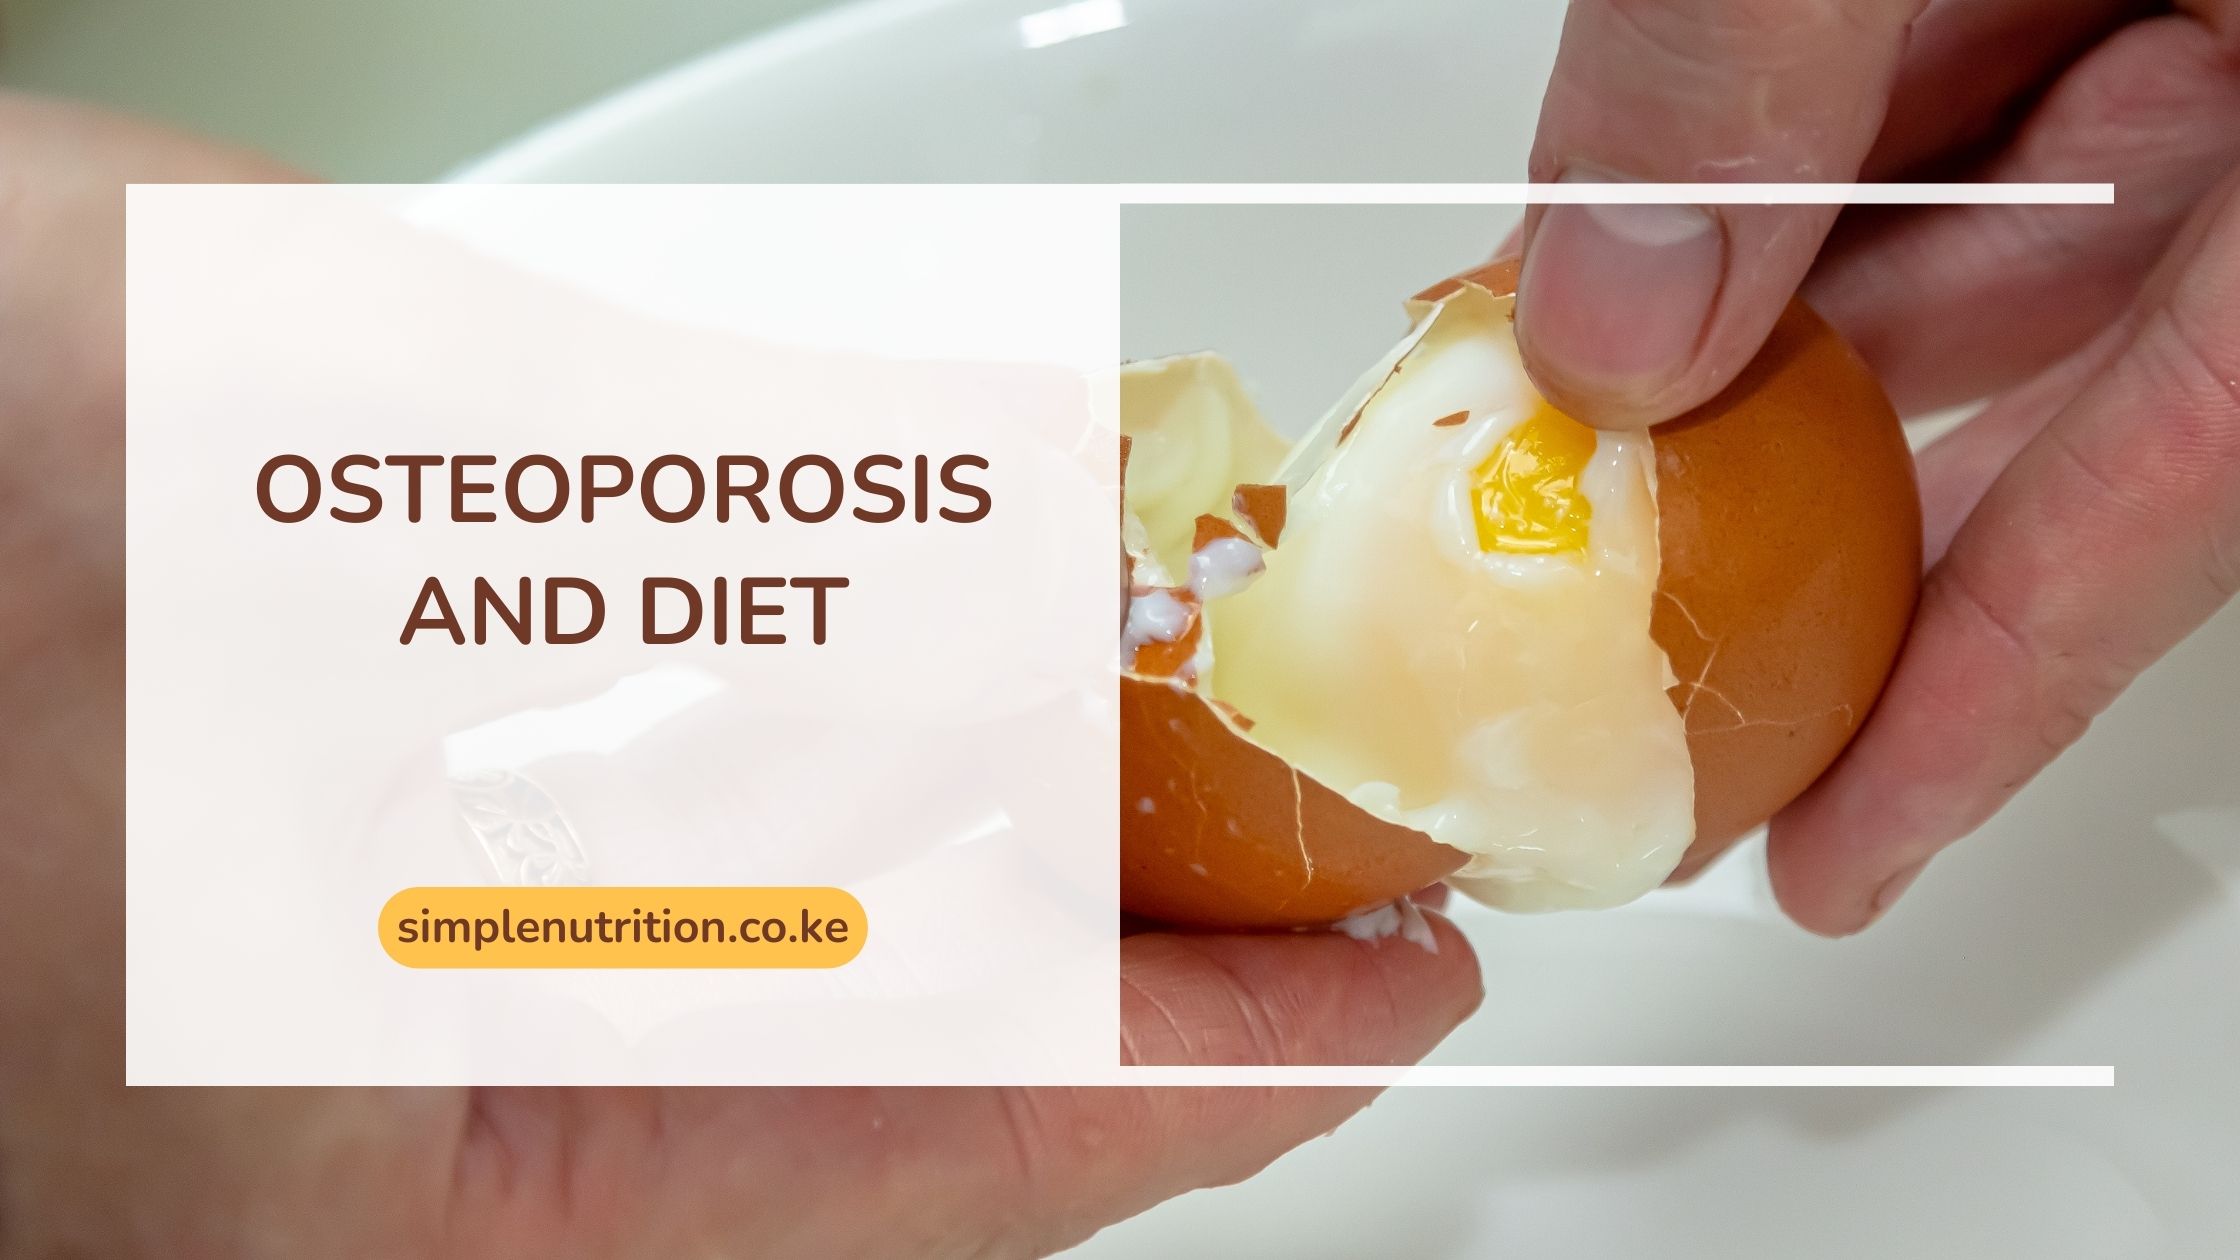 Osteoporosis and diet